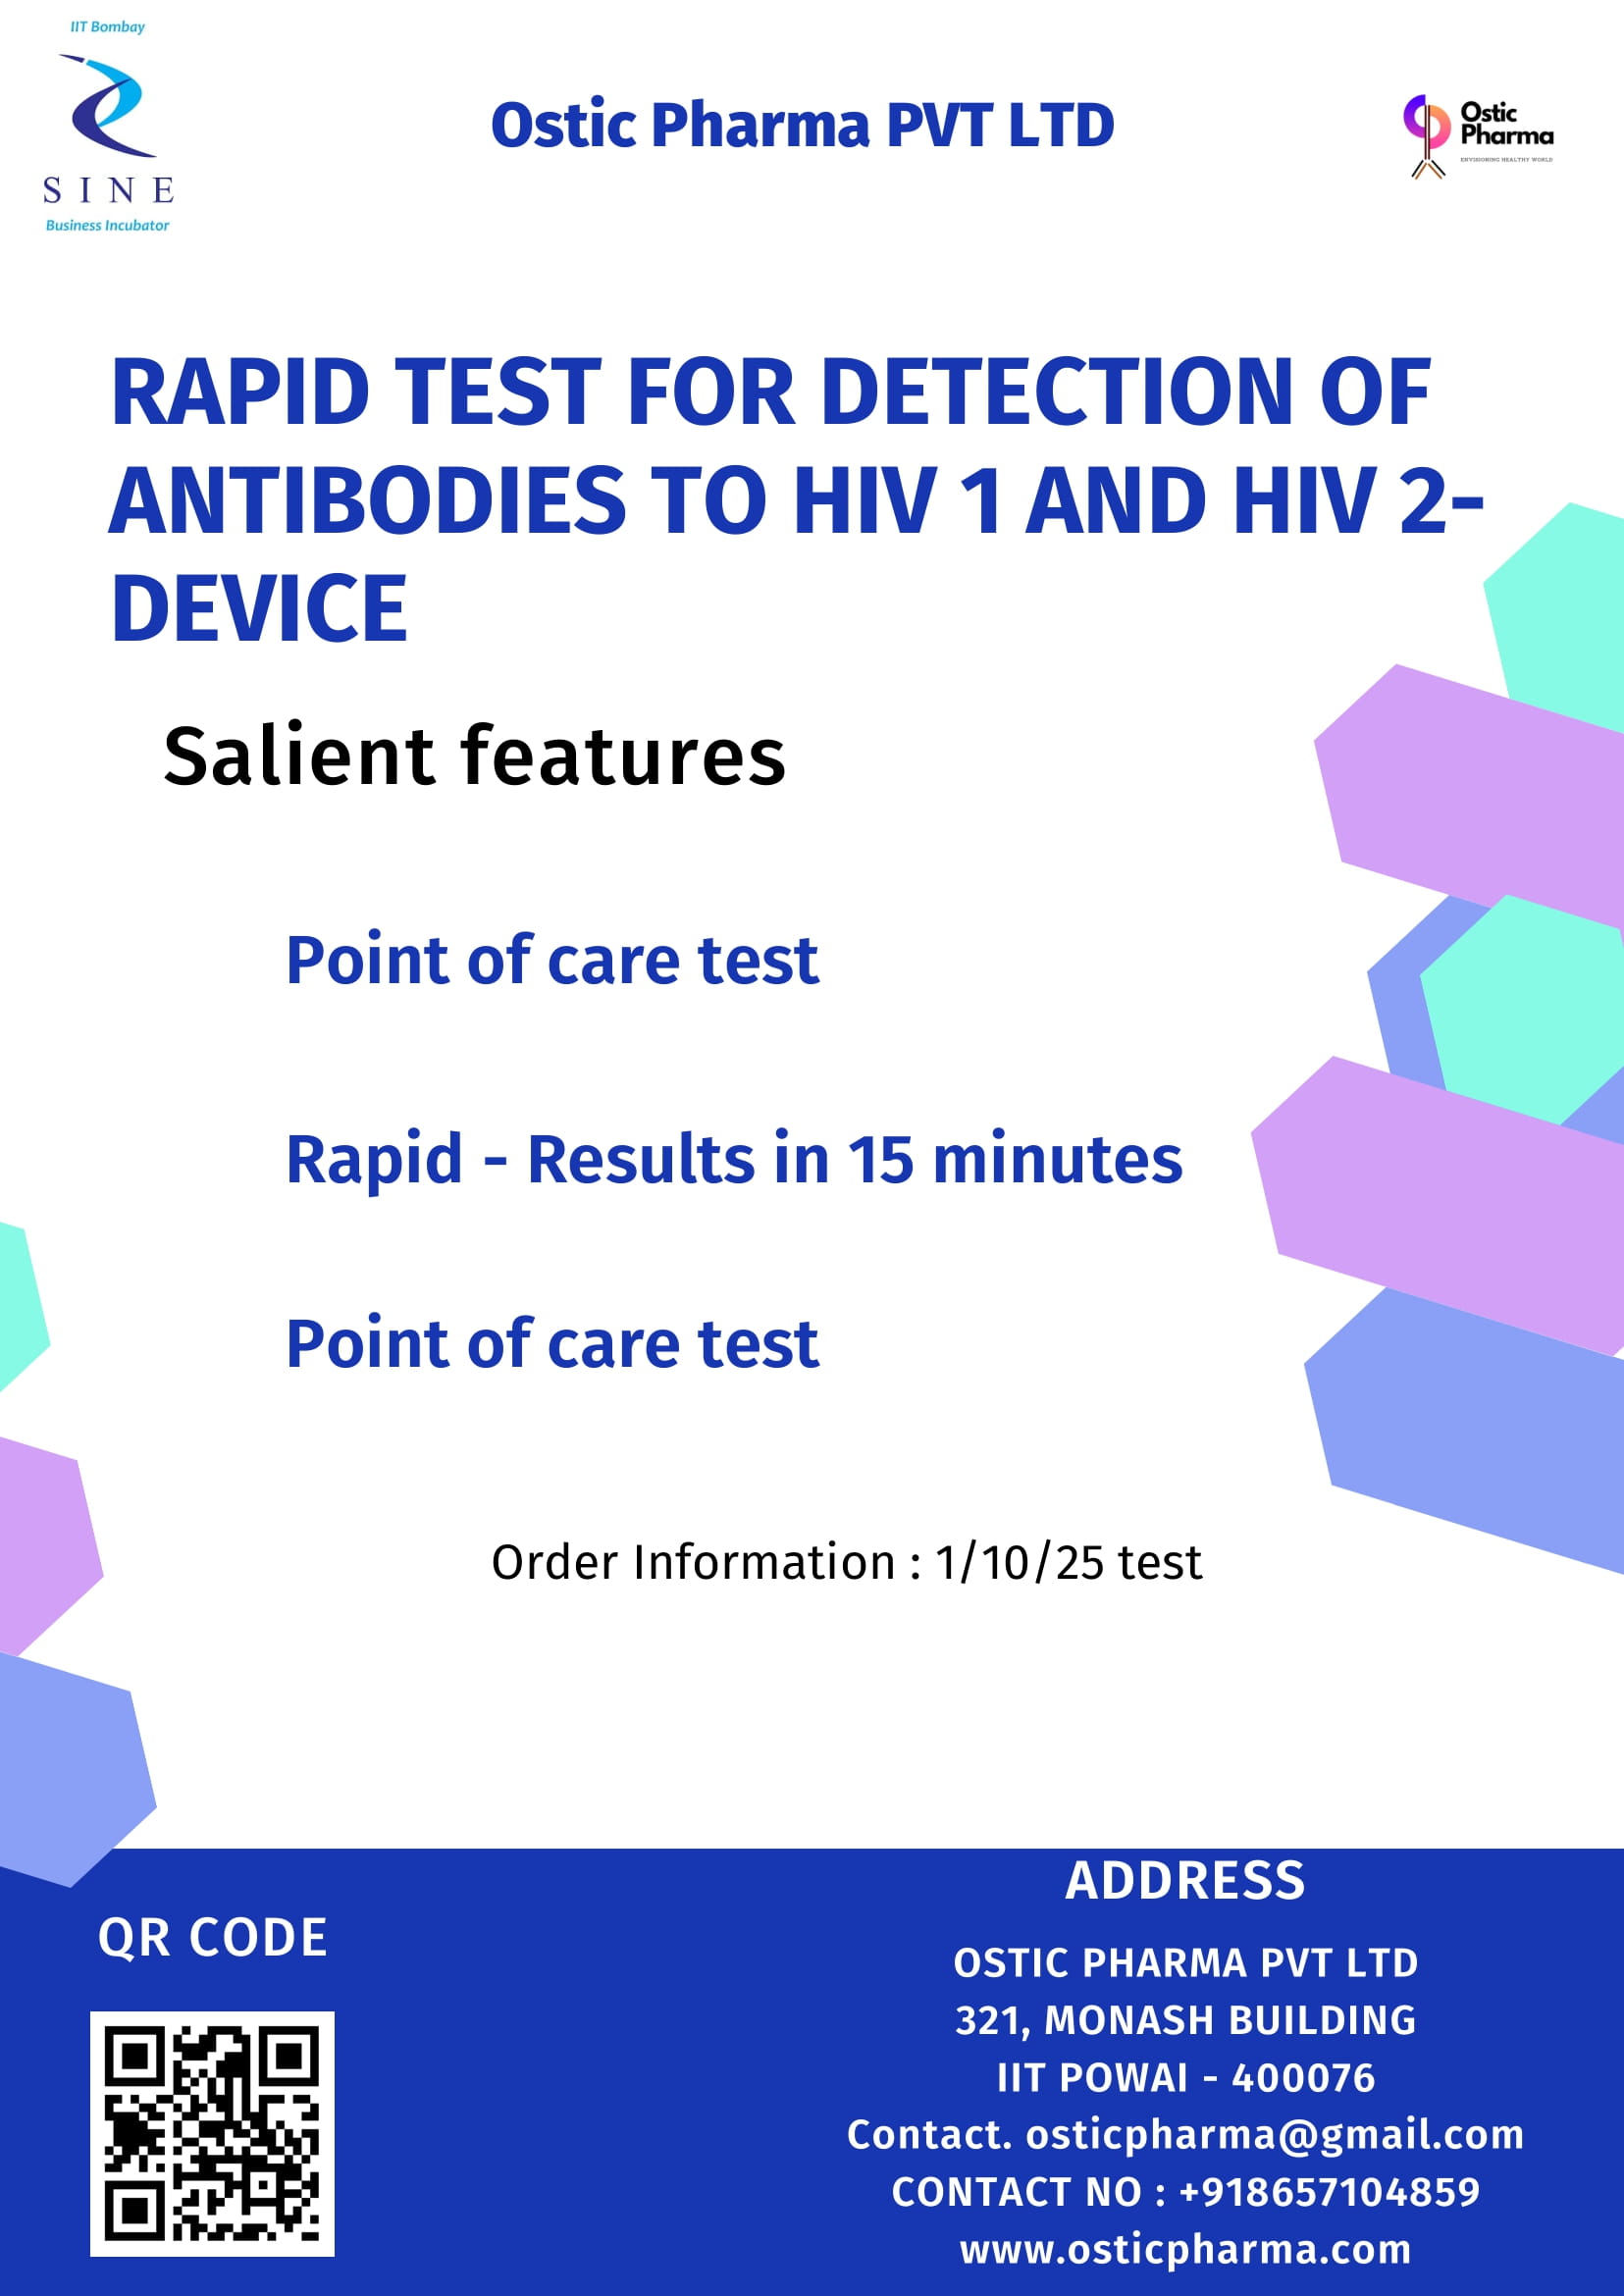 RAPID TEST FOR DETECTION OF ANTIBODIES